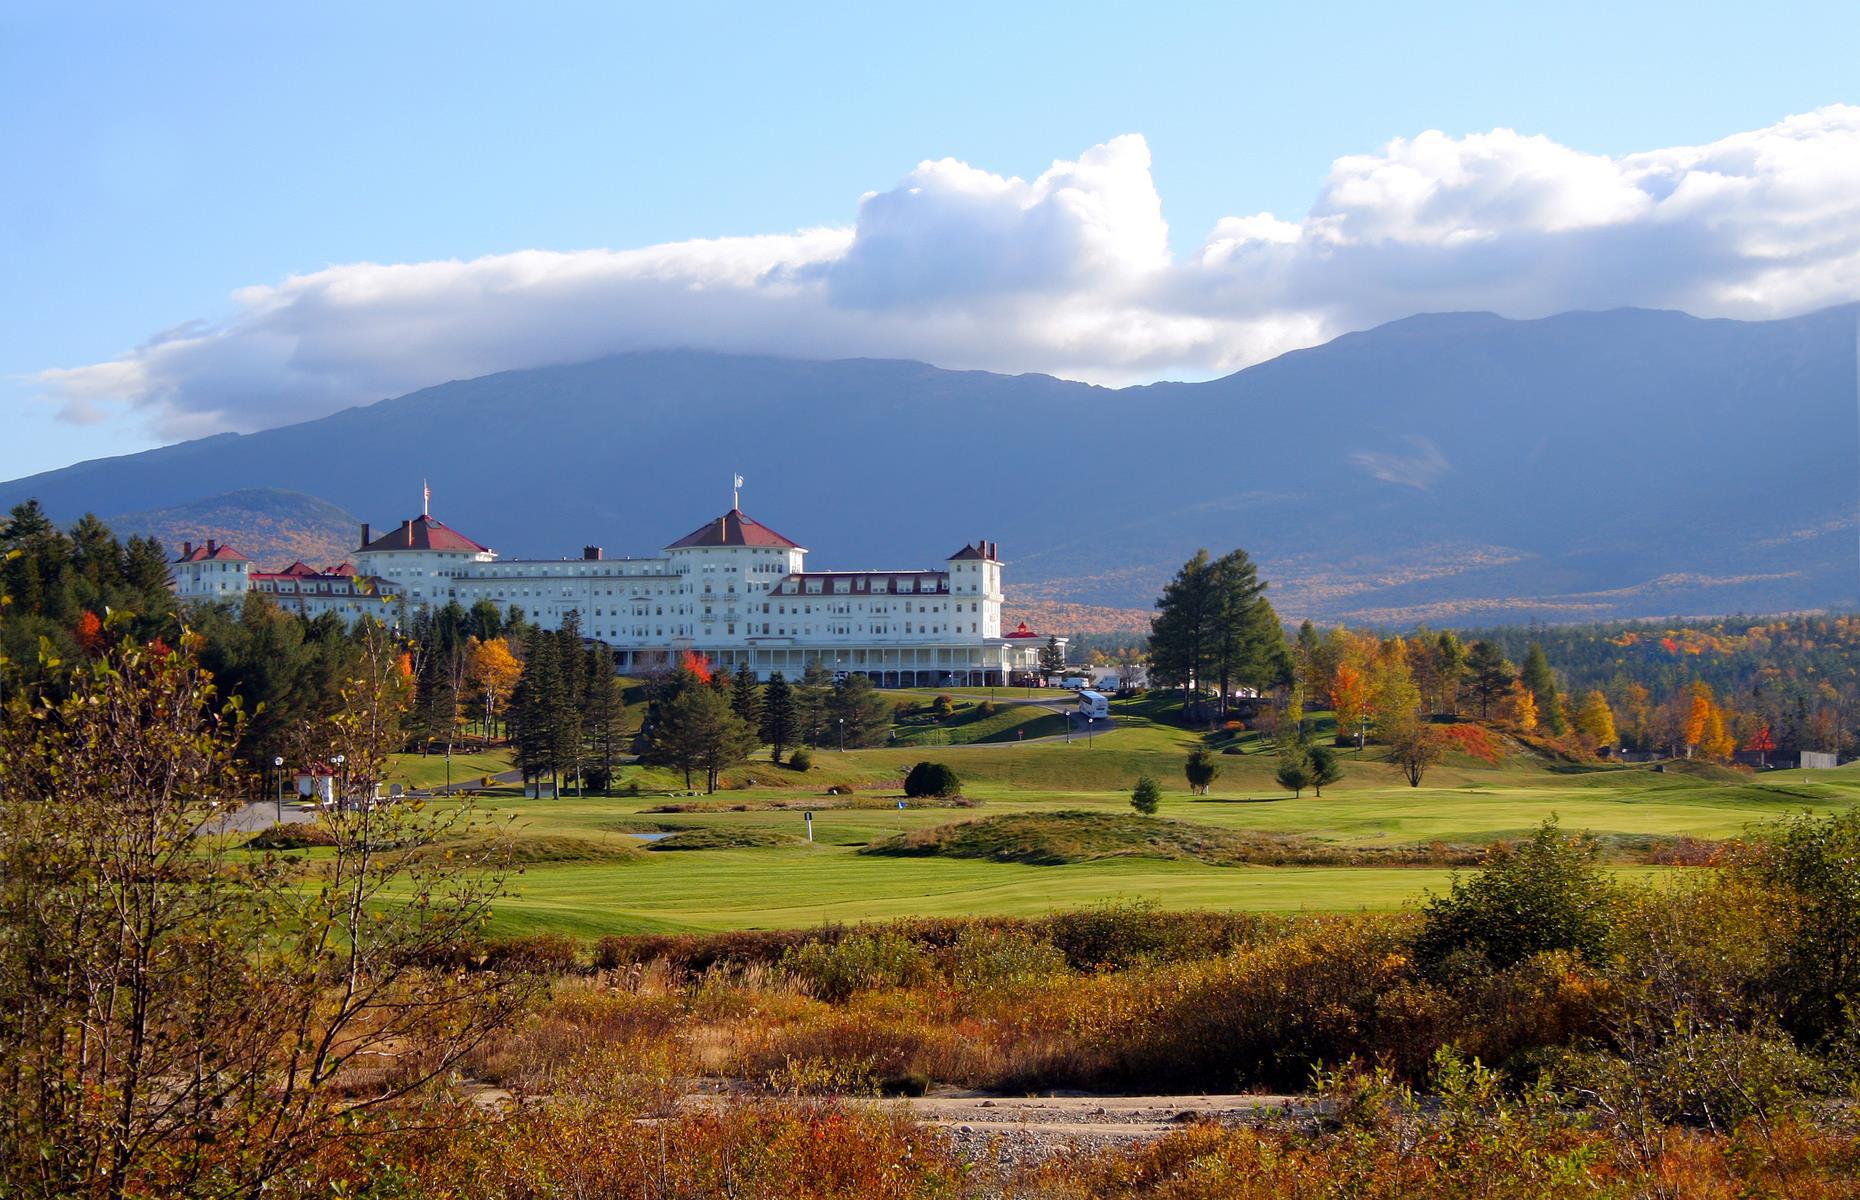 <p><a href="https://www.booking.com/hotel/us/omni-mount-washington-resort.en-gb.html?aid=1280739" rel="nofollow” target=">The monumental New England retreat</a> is a favorite for getting away from it all, but you could find yourself having to share a room with an unexpected guest. It's rumored that Carolyn Stickney, wife of the resort's original owner, has taken up long-term residence. Look out for an elegant figure in Victorian dress and listen out for light knocks at the door. Carolyn has a habit of slipping into guests' rooms, helping herself to their belongings and then placing them back exactly where she found them.</p>